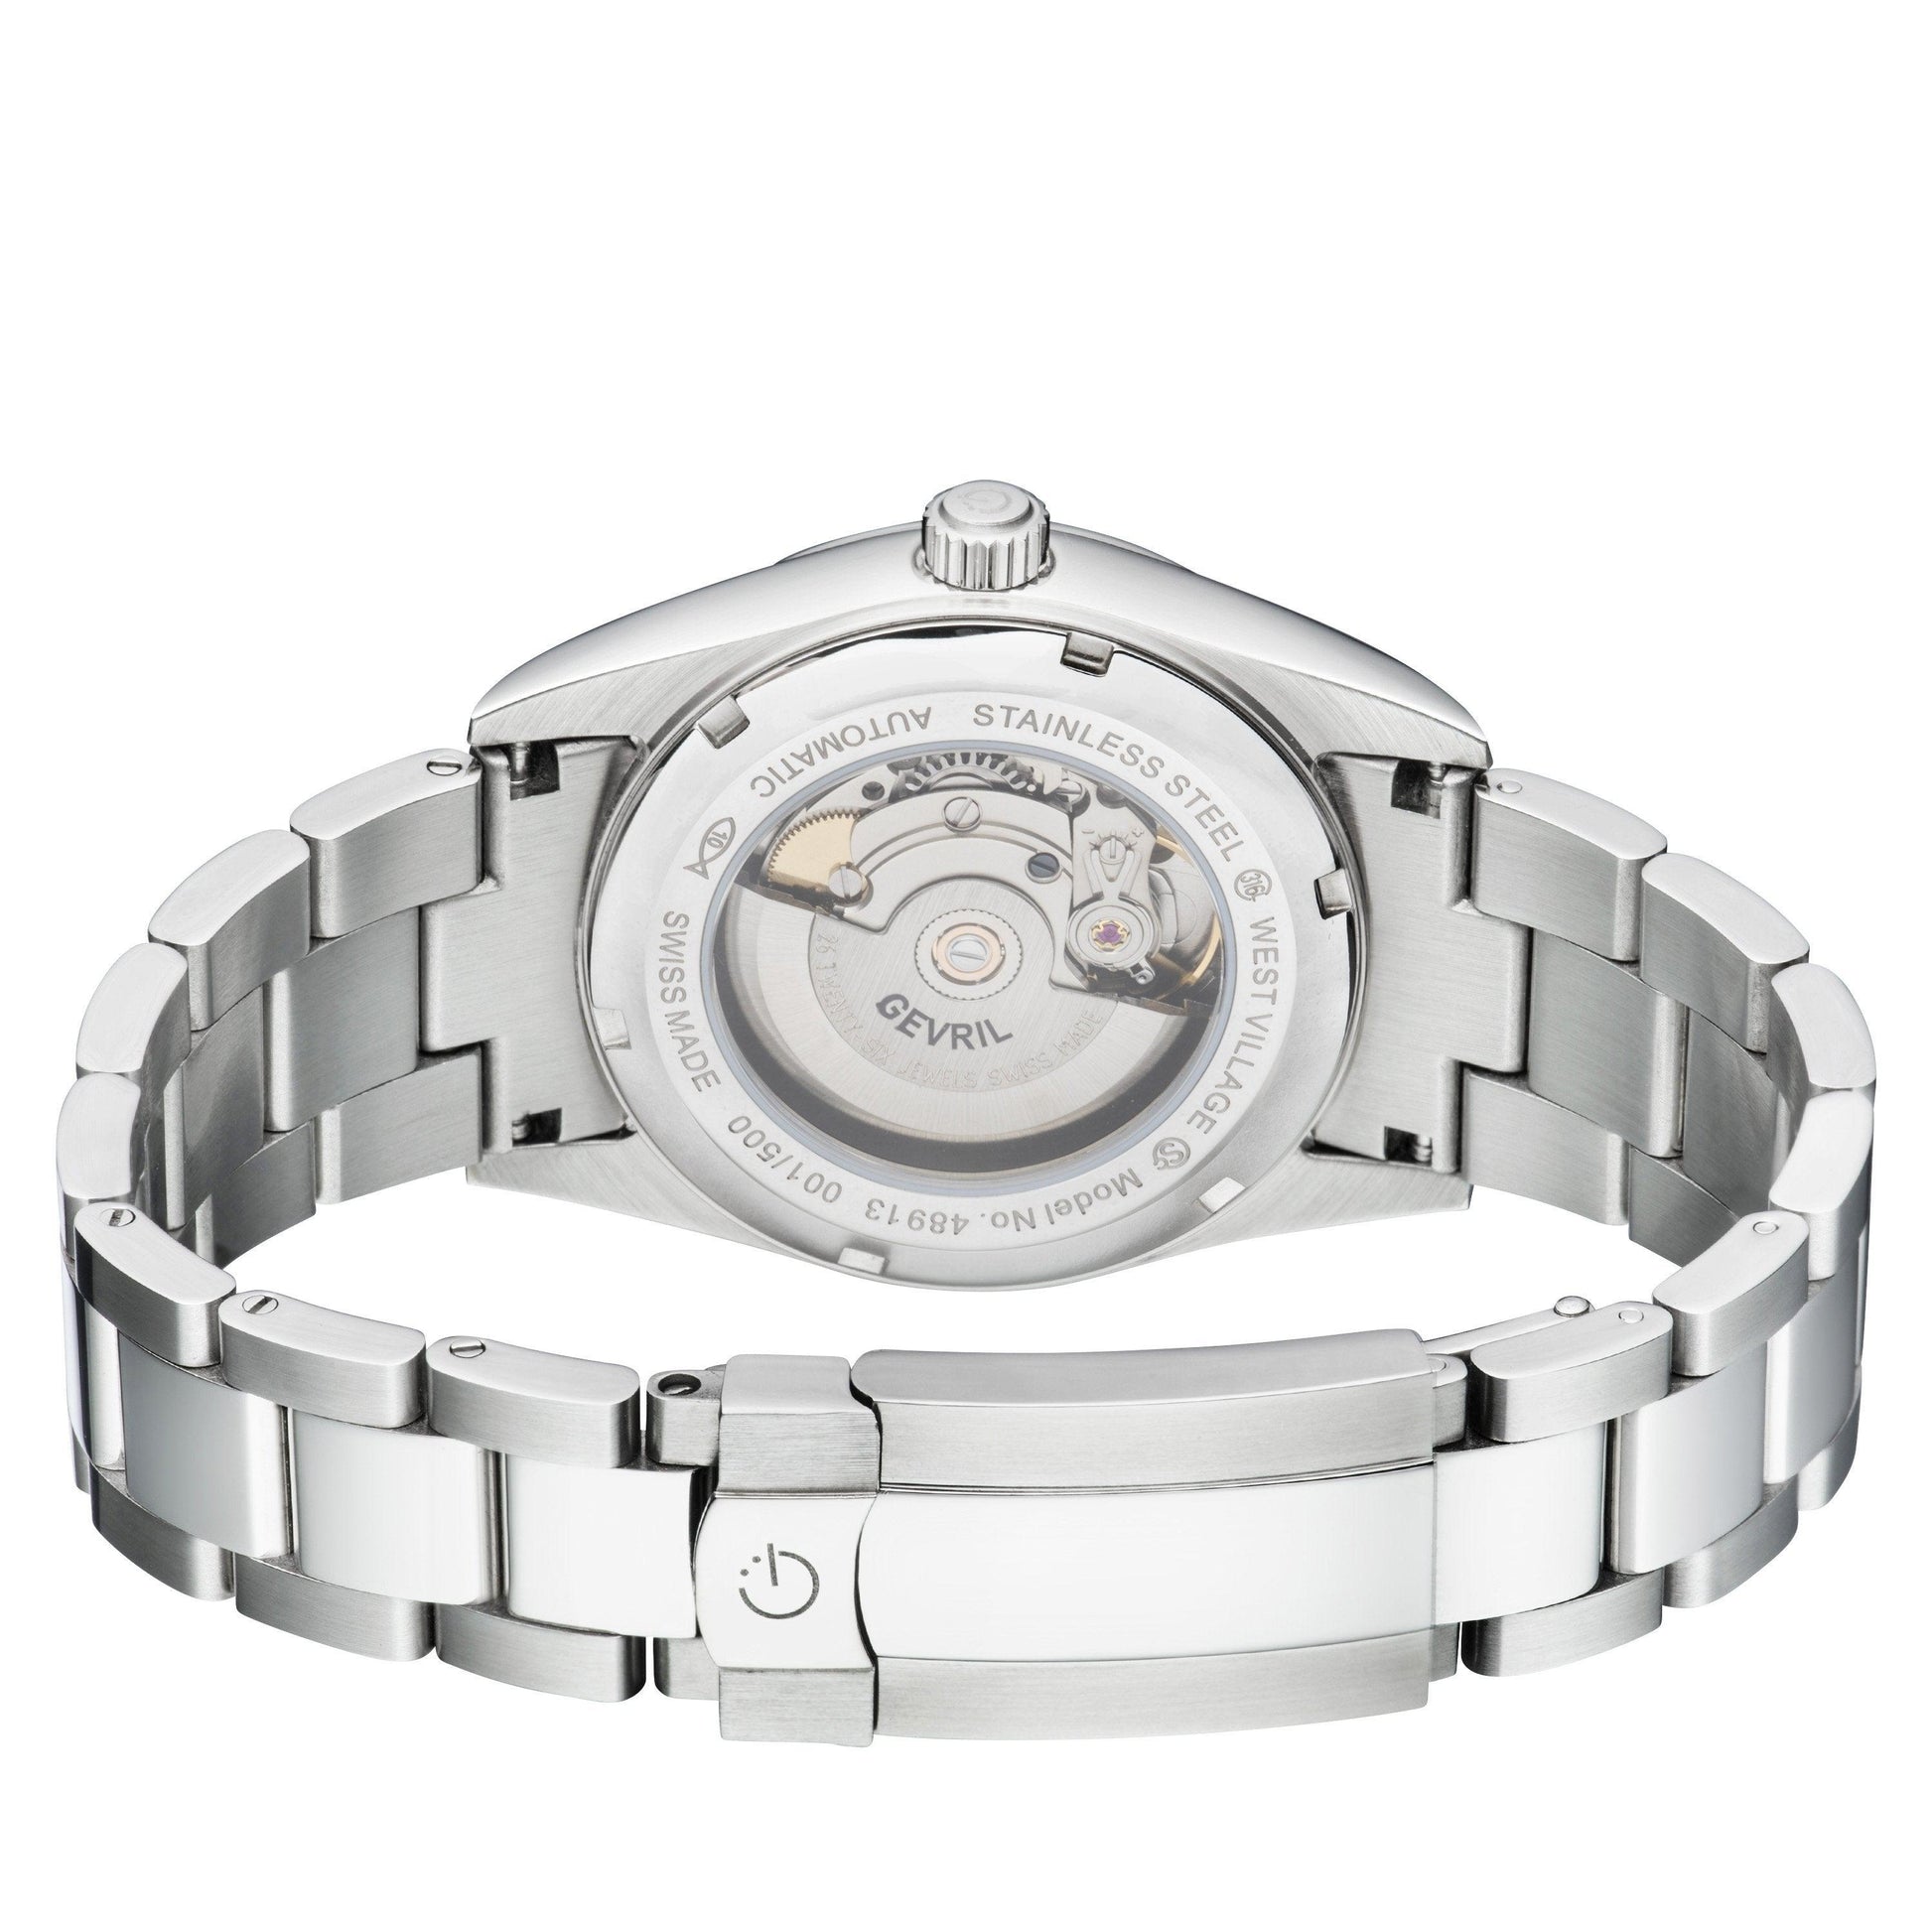 Gevril-Luxury-Swiss-Watches-Gevril West Village - Automatic-48913